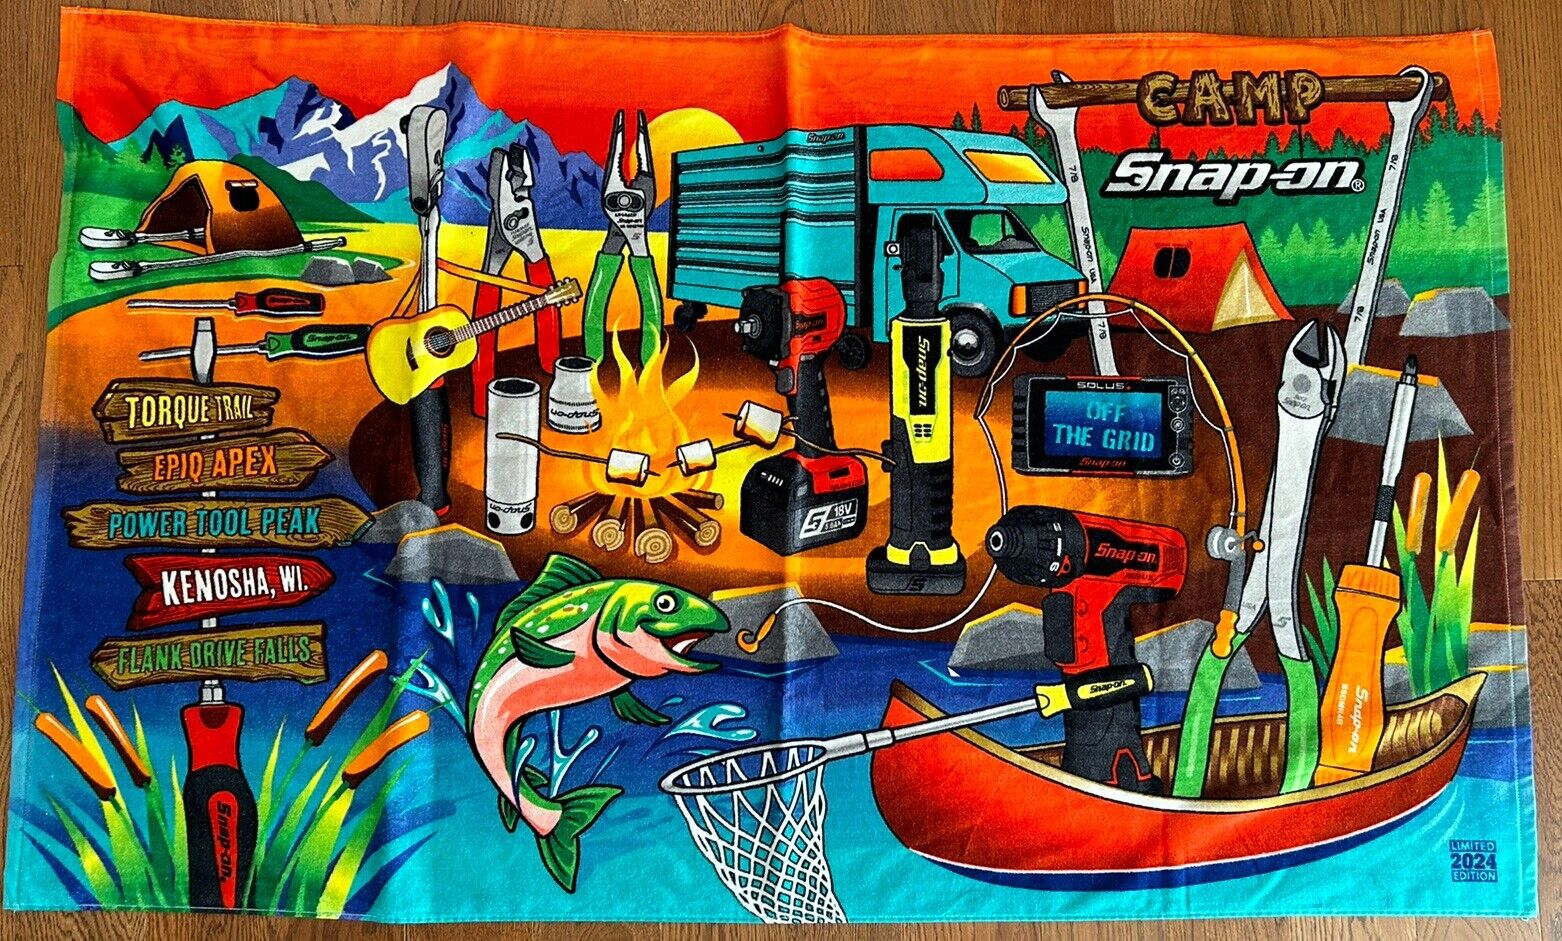 CAMP 2024 SNAP-ON TOOL, Off The Grid Large Beach Towel New 100%Cotton Limited